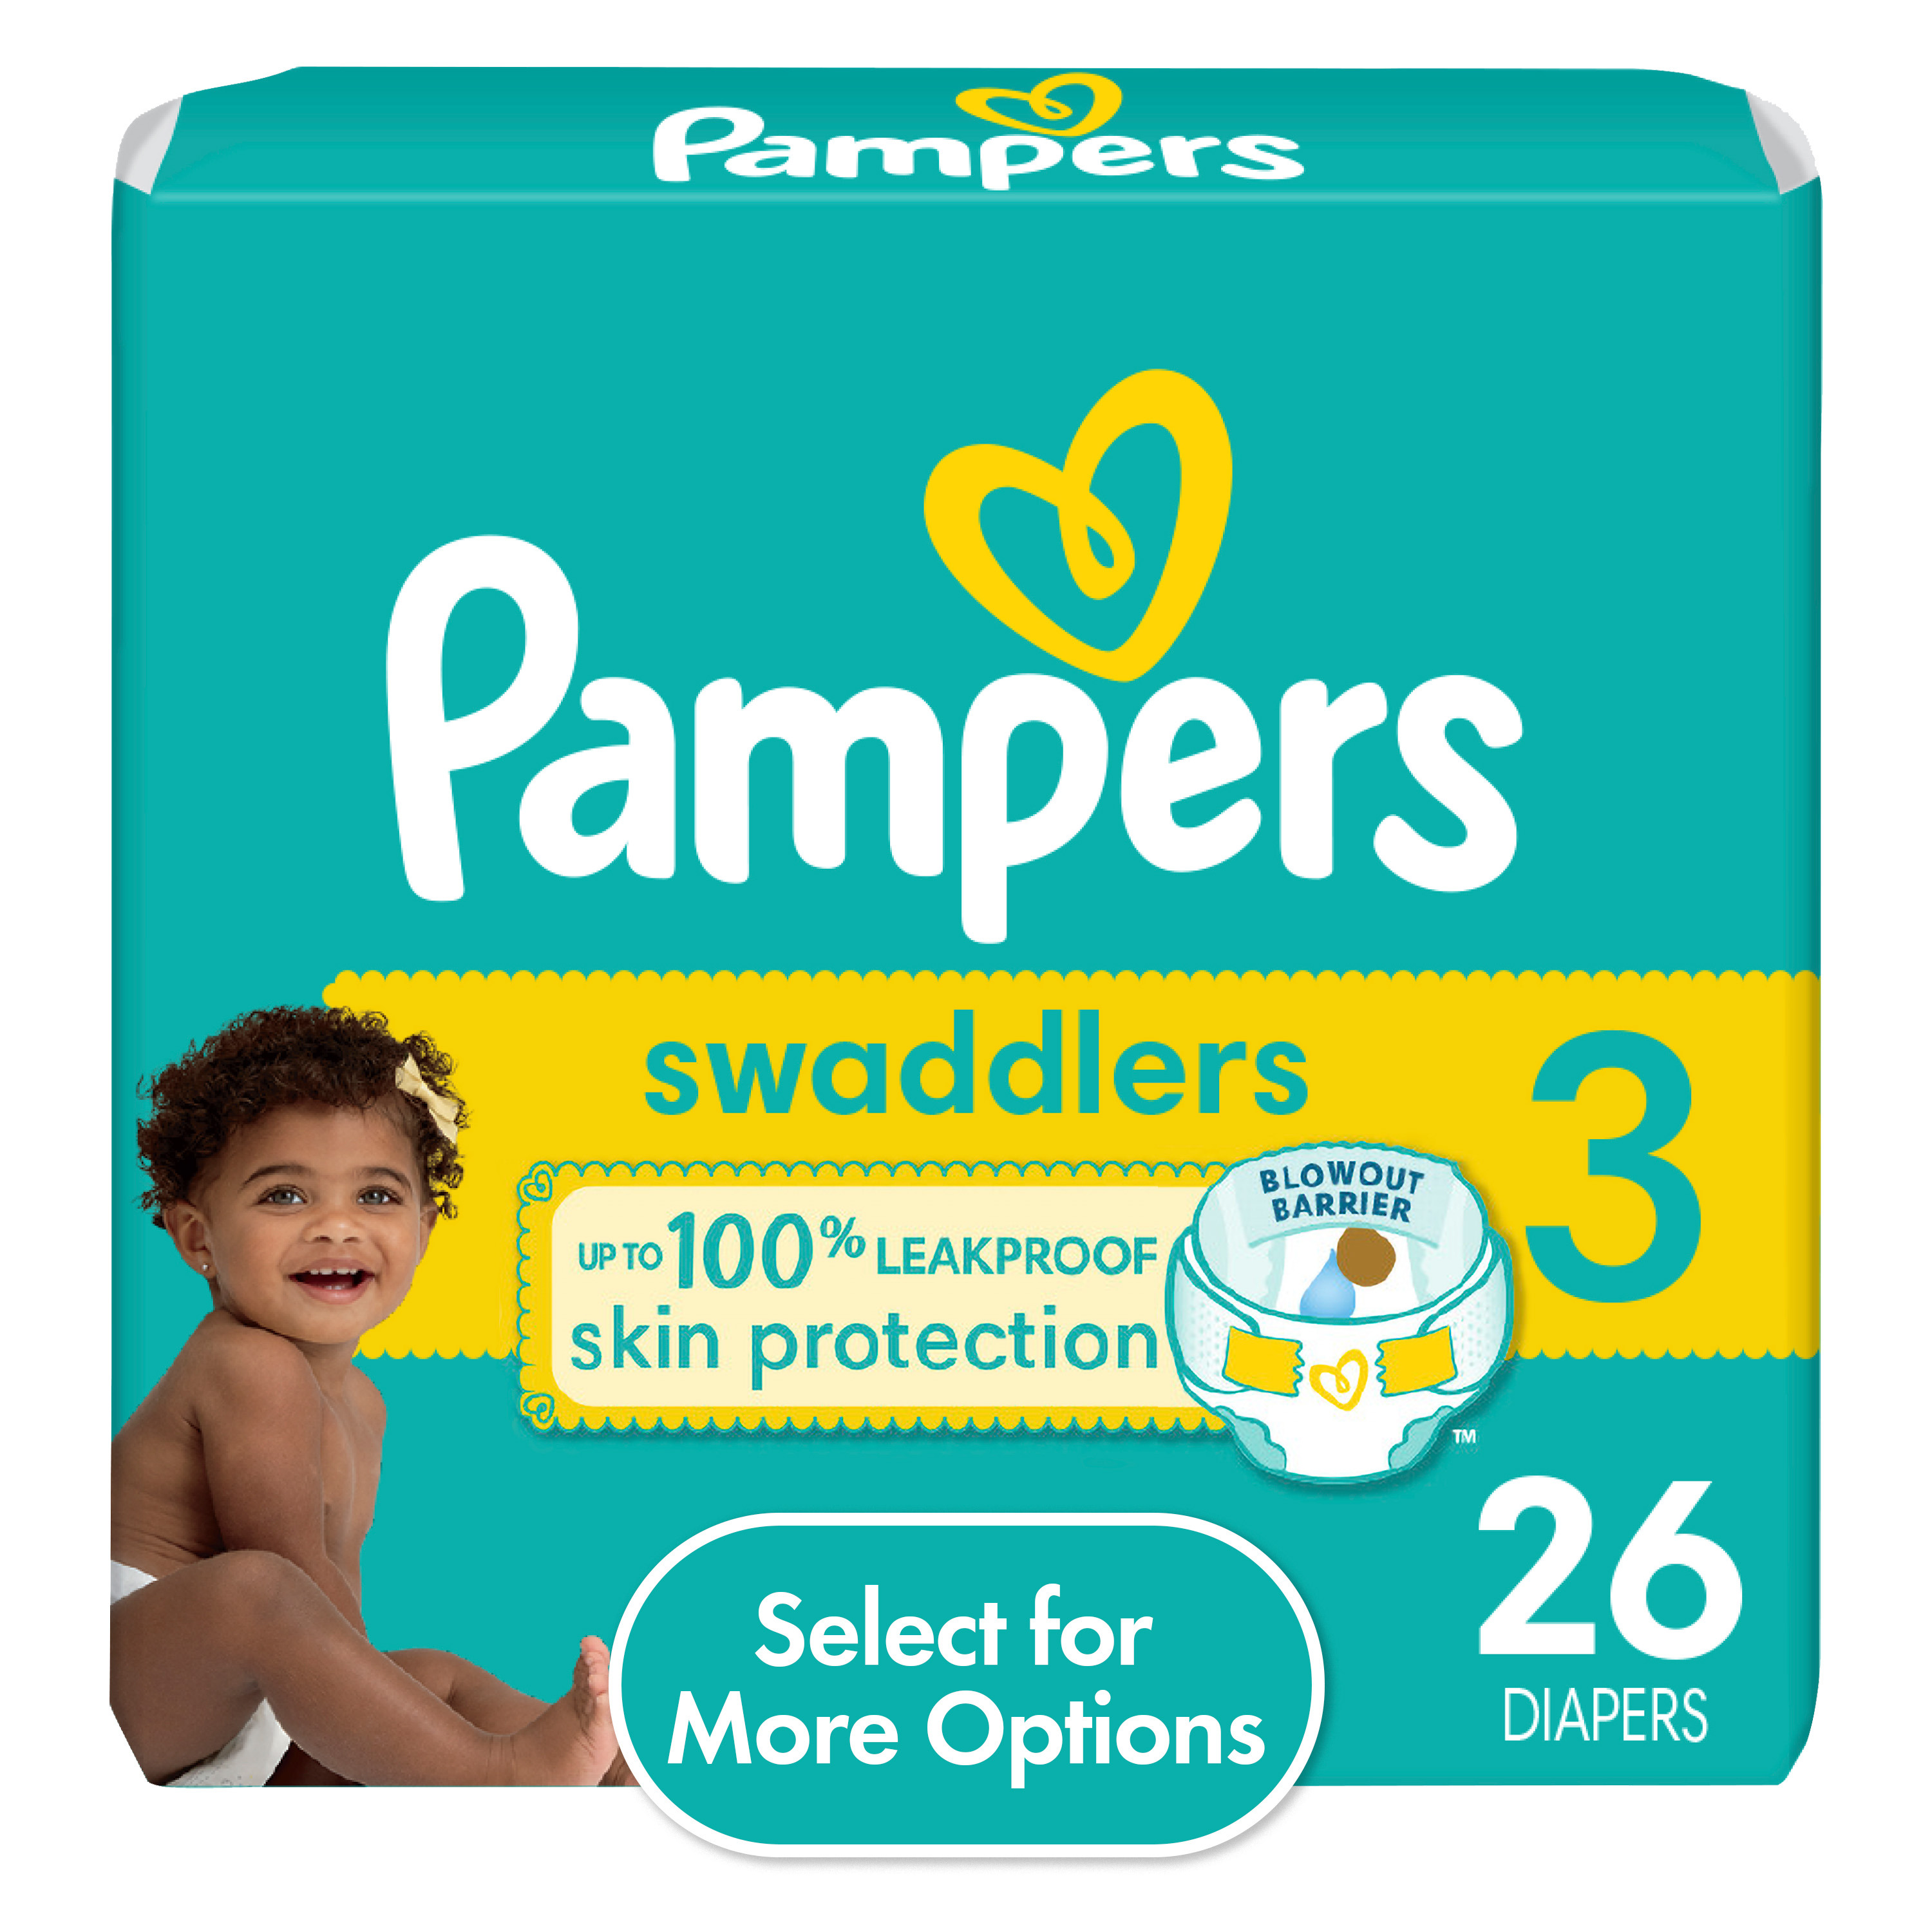 Pampers Swaddlers Diapers, Size 3, 26 Count (Select for More Options) - image 1 of 14